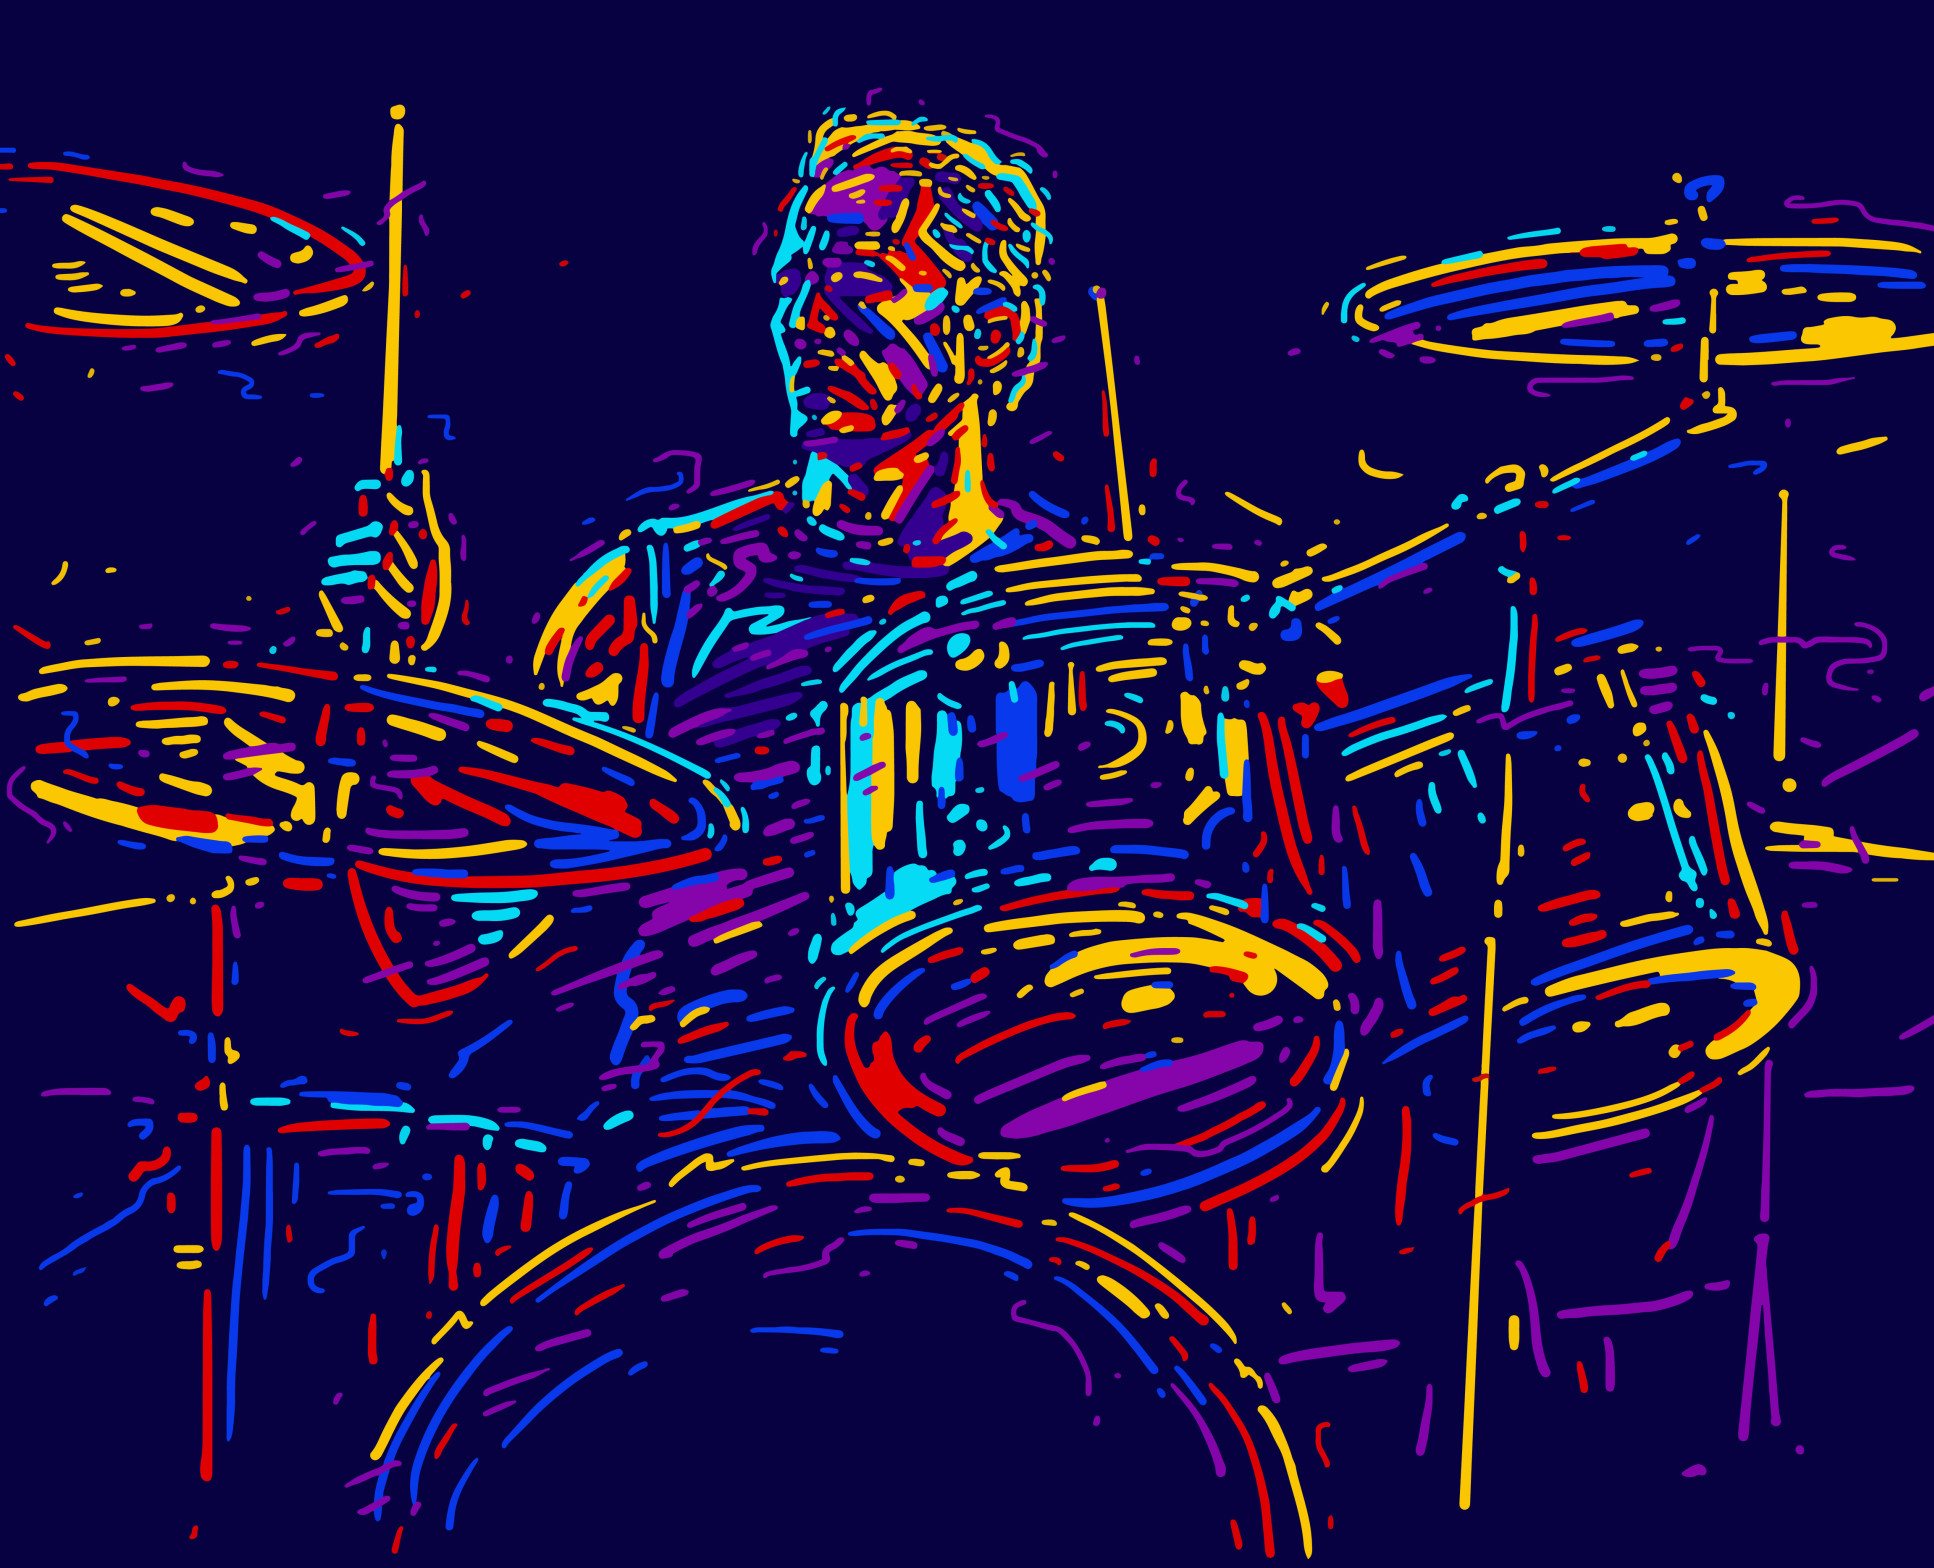 Colourful illustration of man playing drums